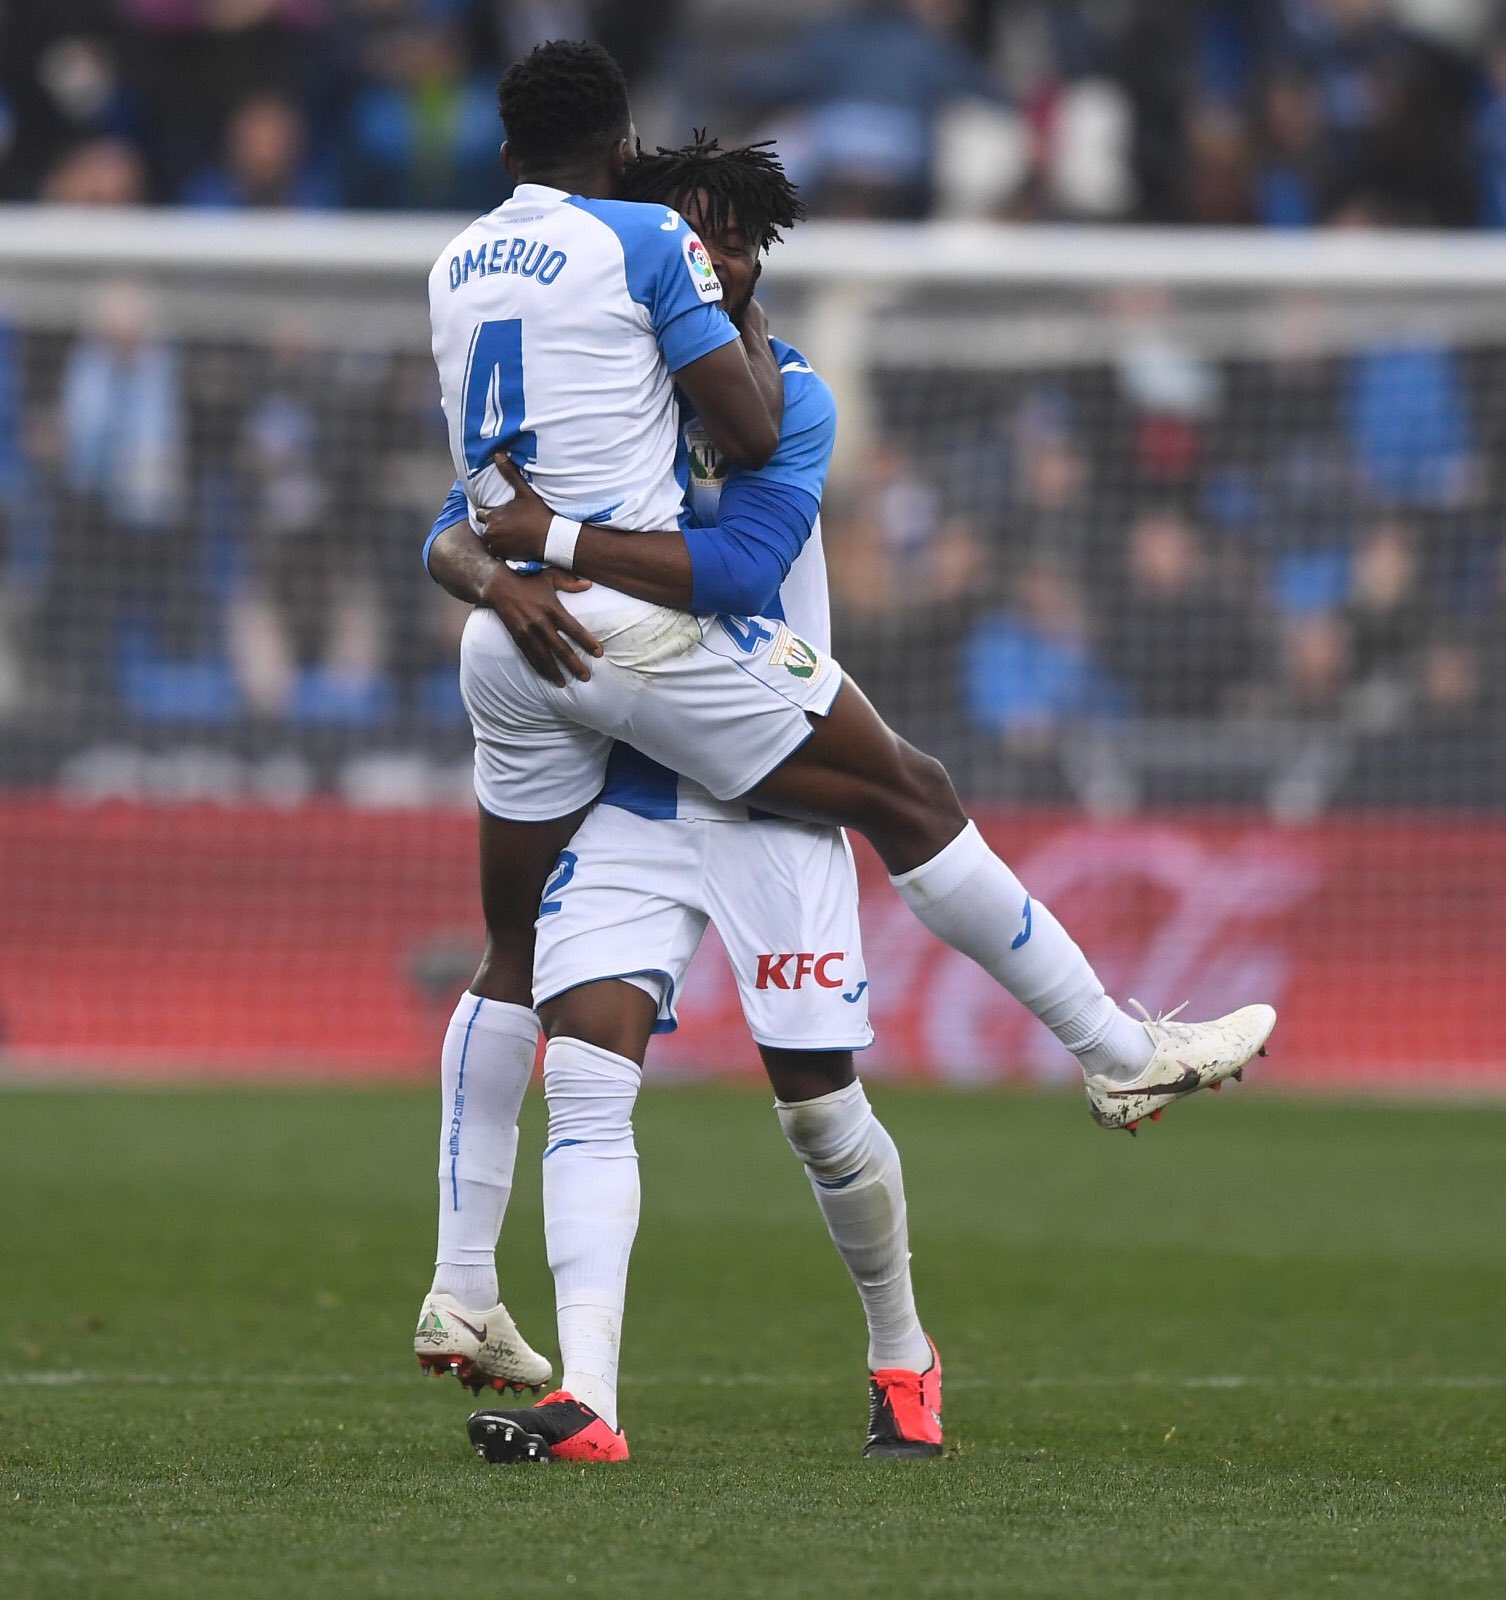 Omeruo Thrilled To Score First-Ever LaLiga Goal For Leganes